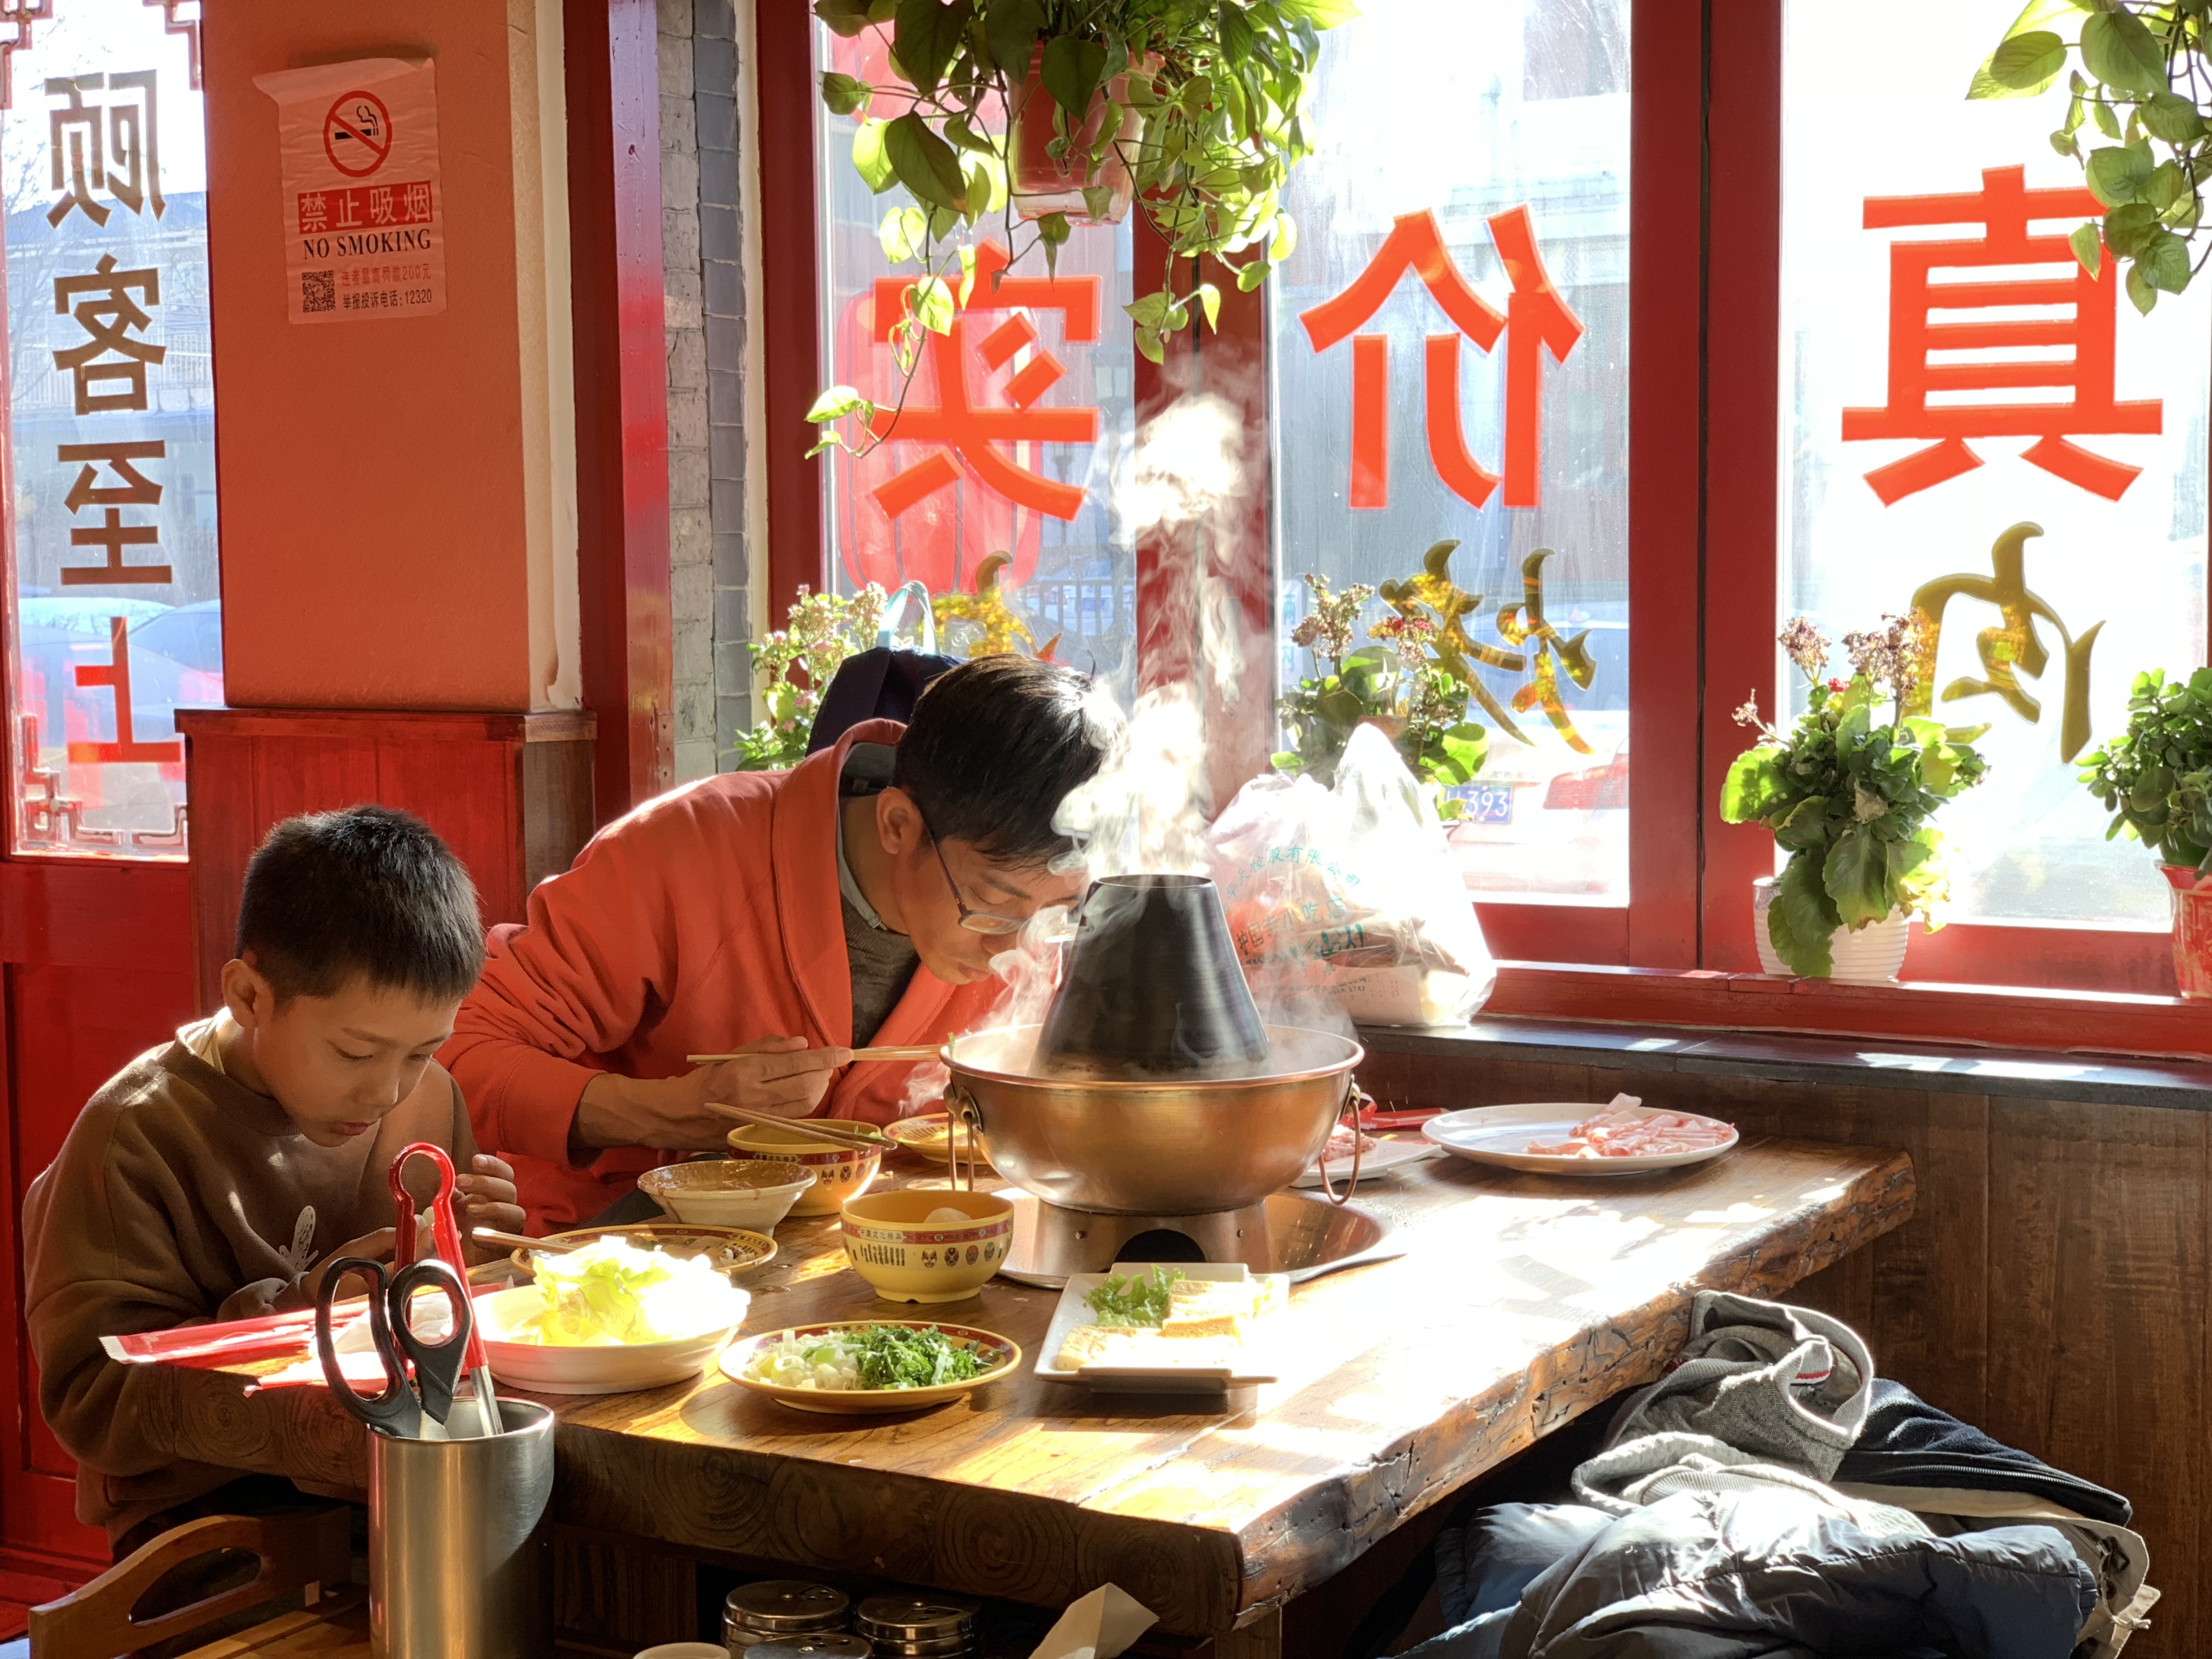 A file photo shows a father and son enjoying a hot pot at a restaurant in Beijing. /CGTN